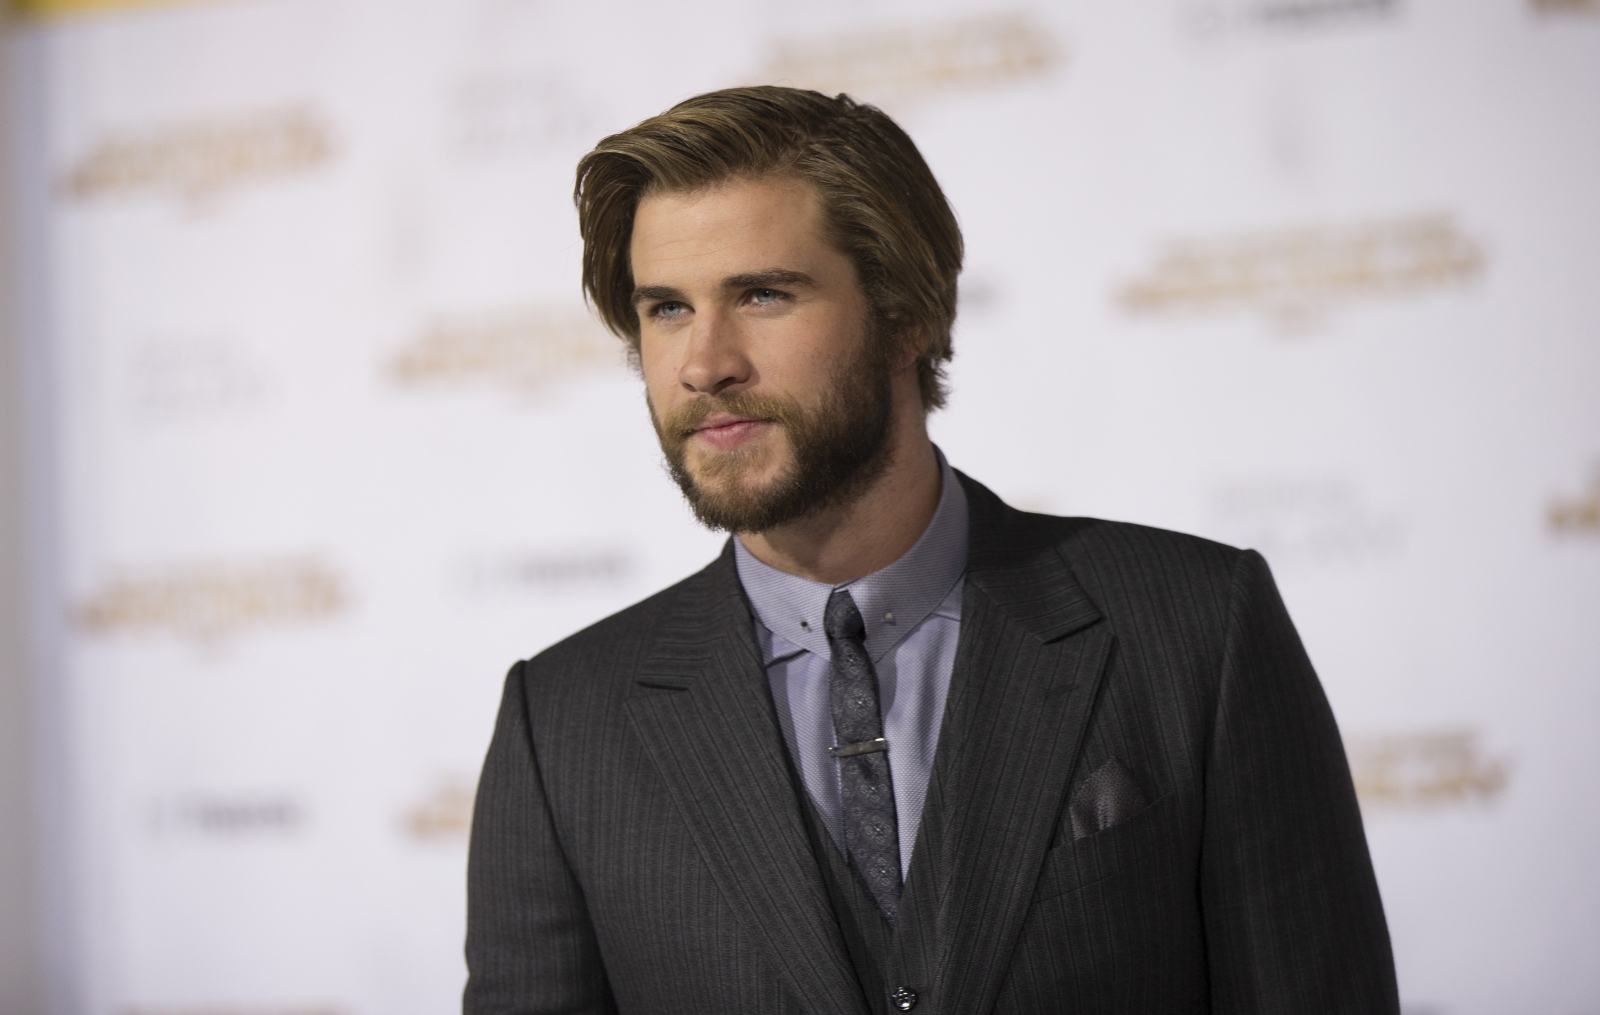 Liam Hemsworth and Megan Fox dating? Miley Cyrus' ex-fiance playing it cool with ...1600 x 1015